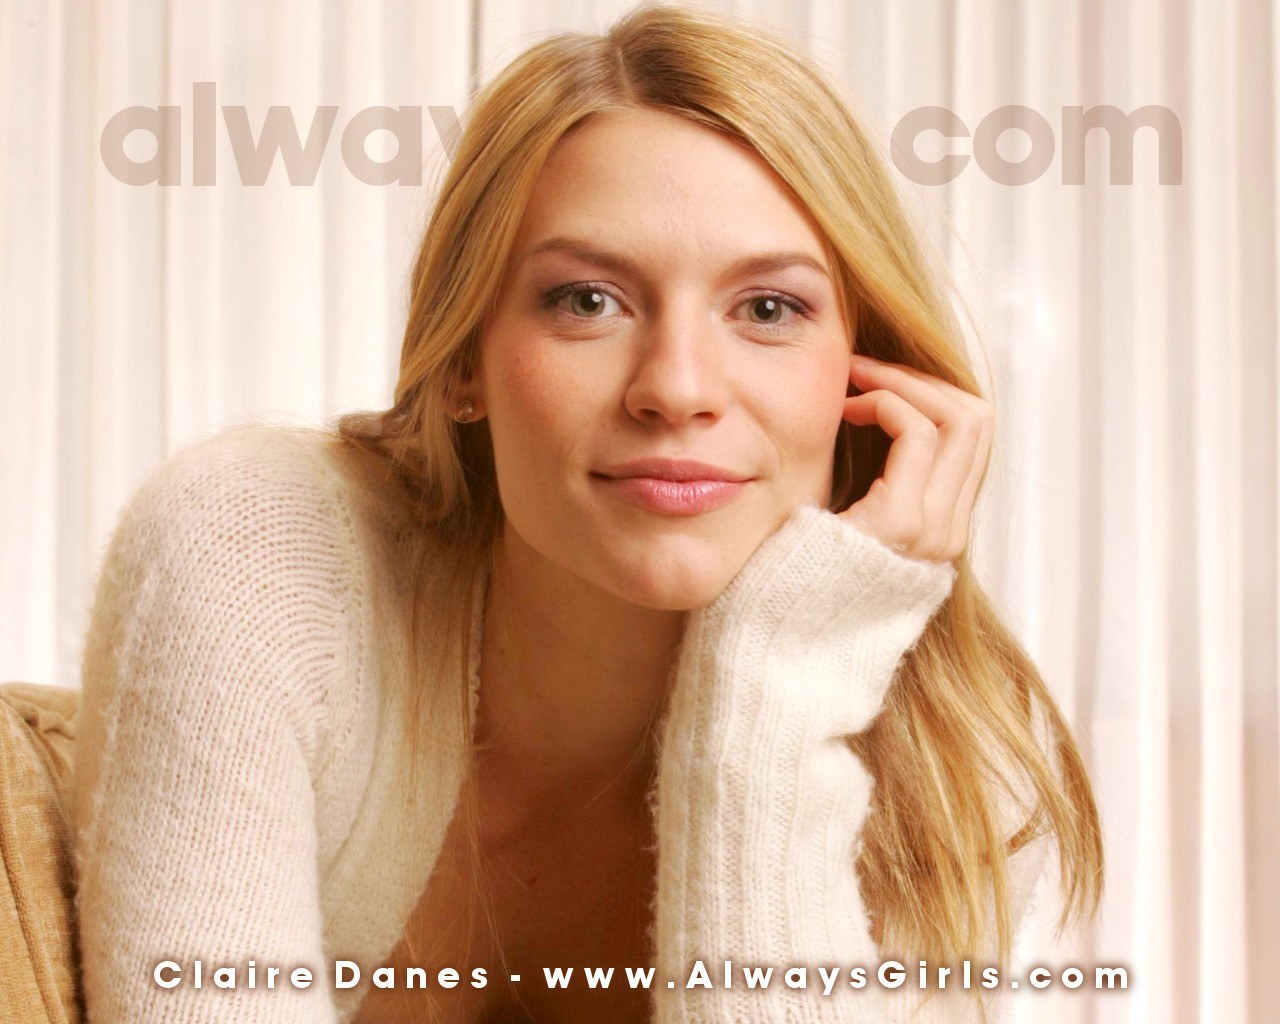 Claire Danes 2020 Wallpapers